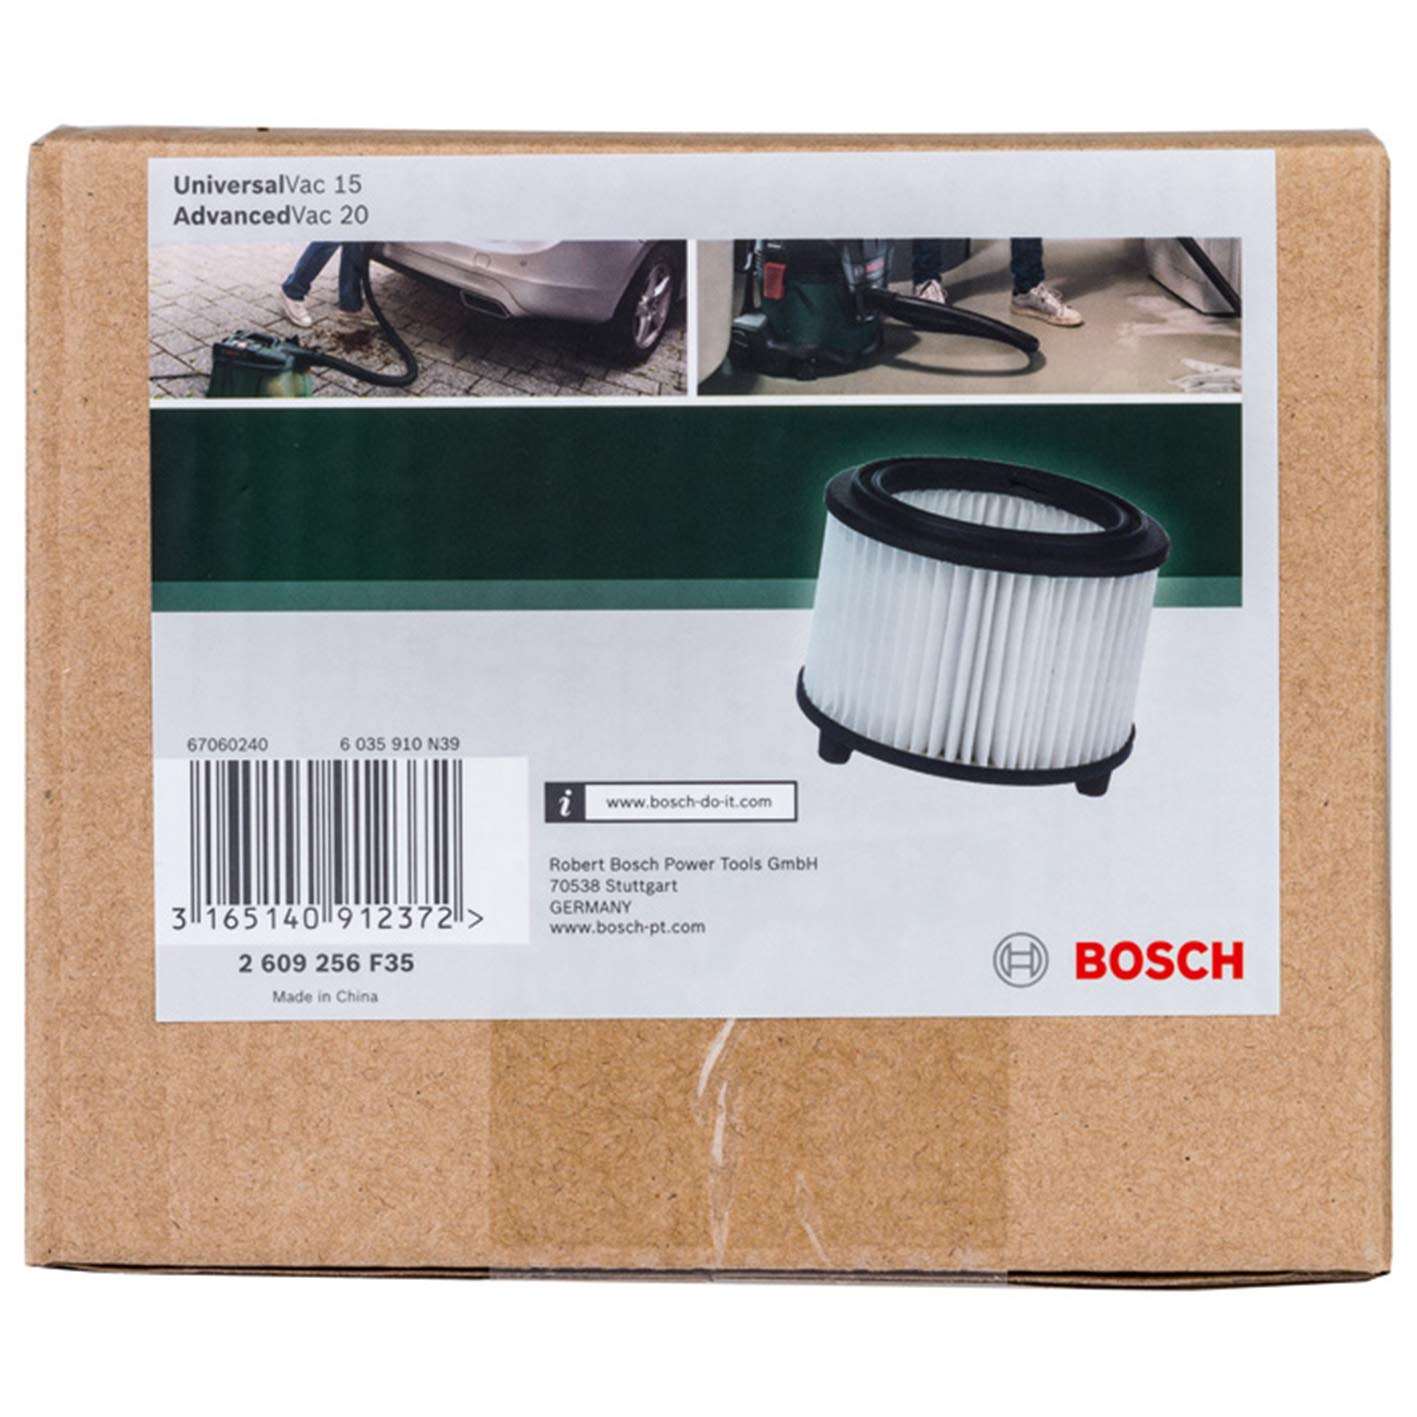 Bosch Cartridge filter, washable for AdvancedVac 20 2609256F35 Power Tool Services